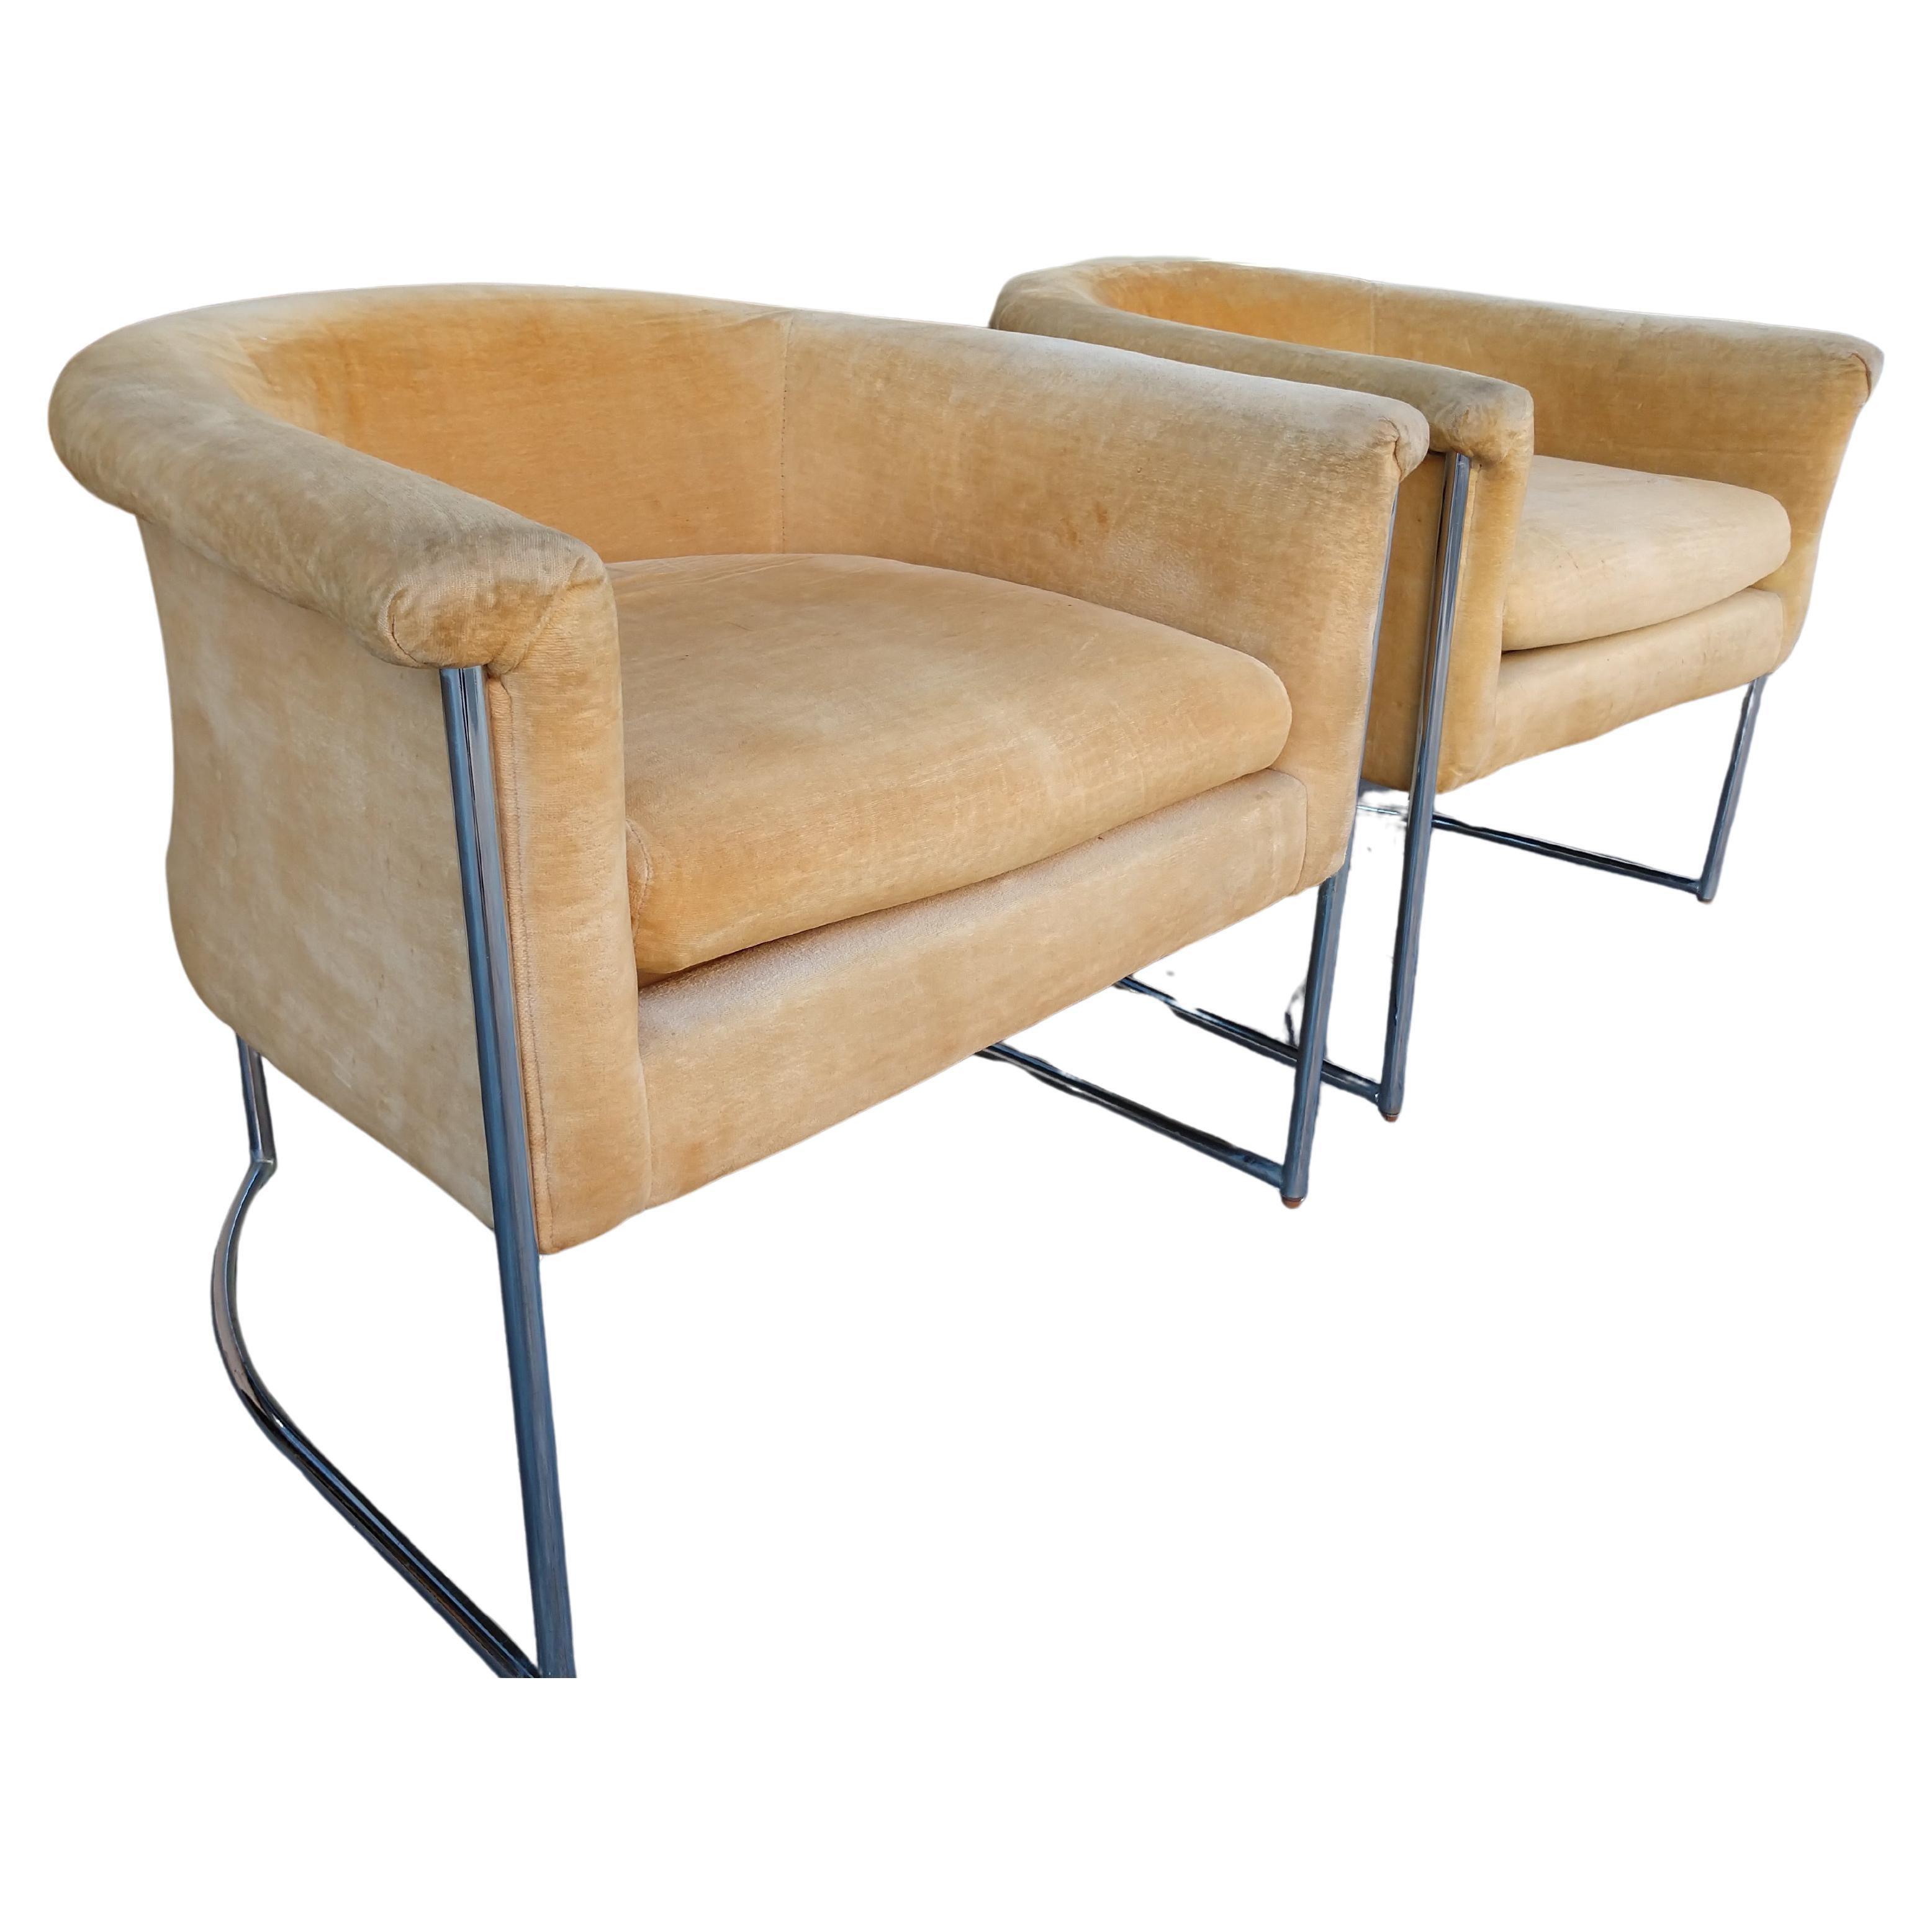 Pair of Mid-Century Modern Barrel Back Lounge Chairs For Sale